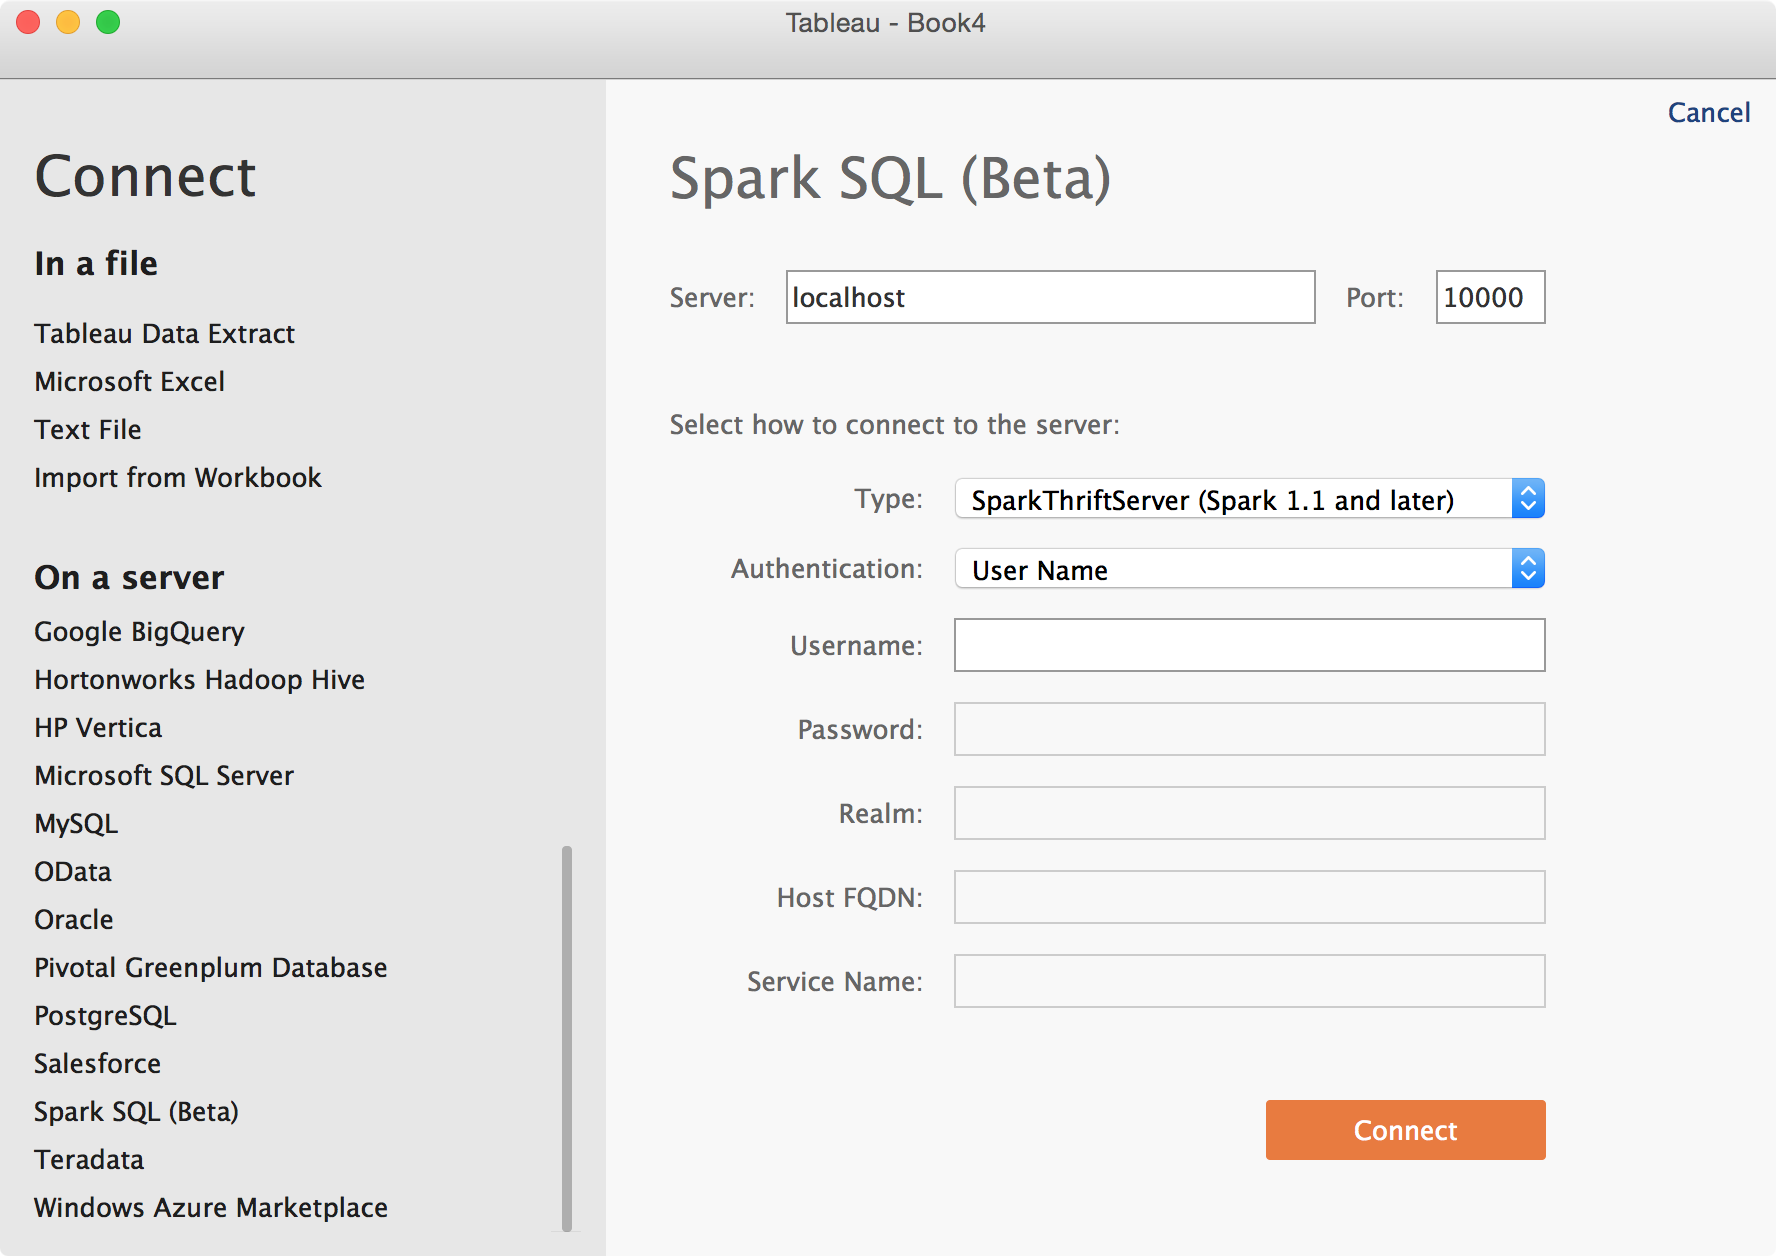 Tableau and Spark SQL